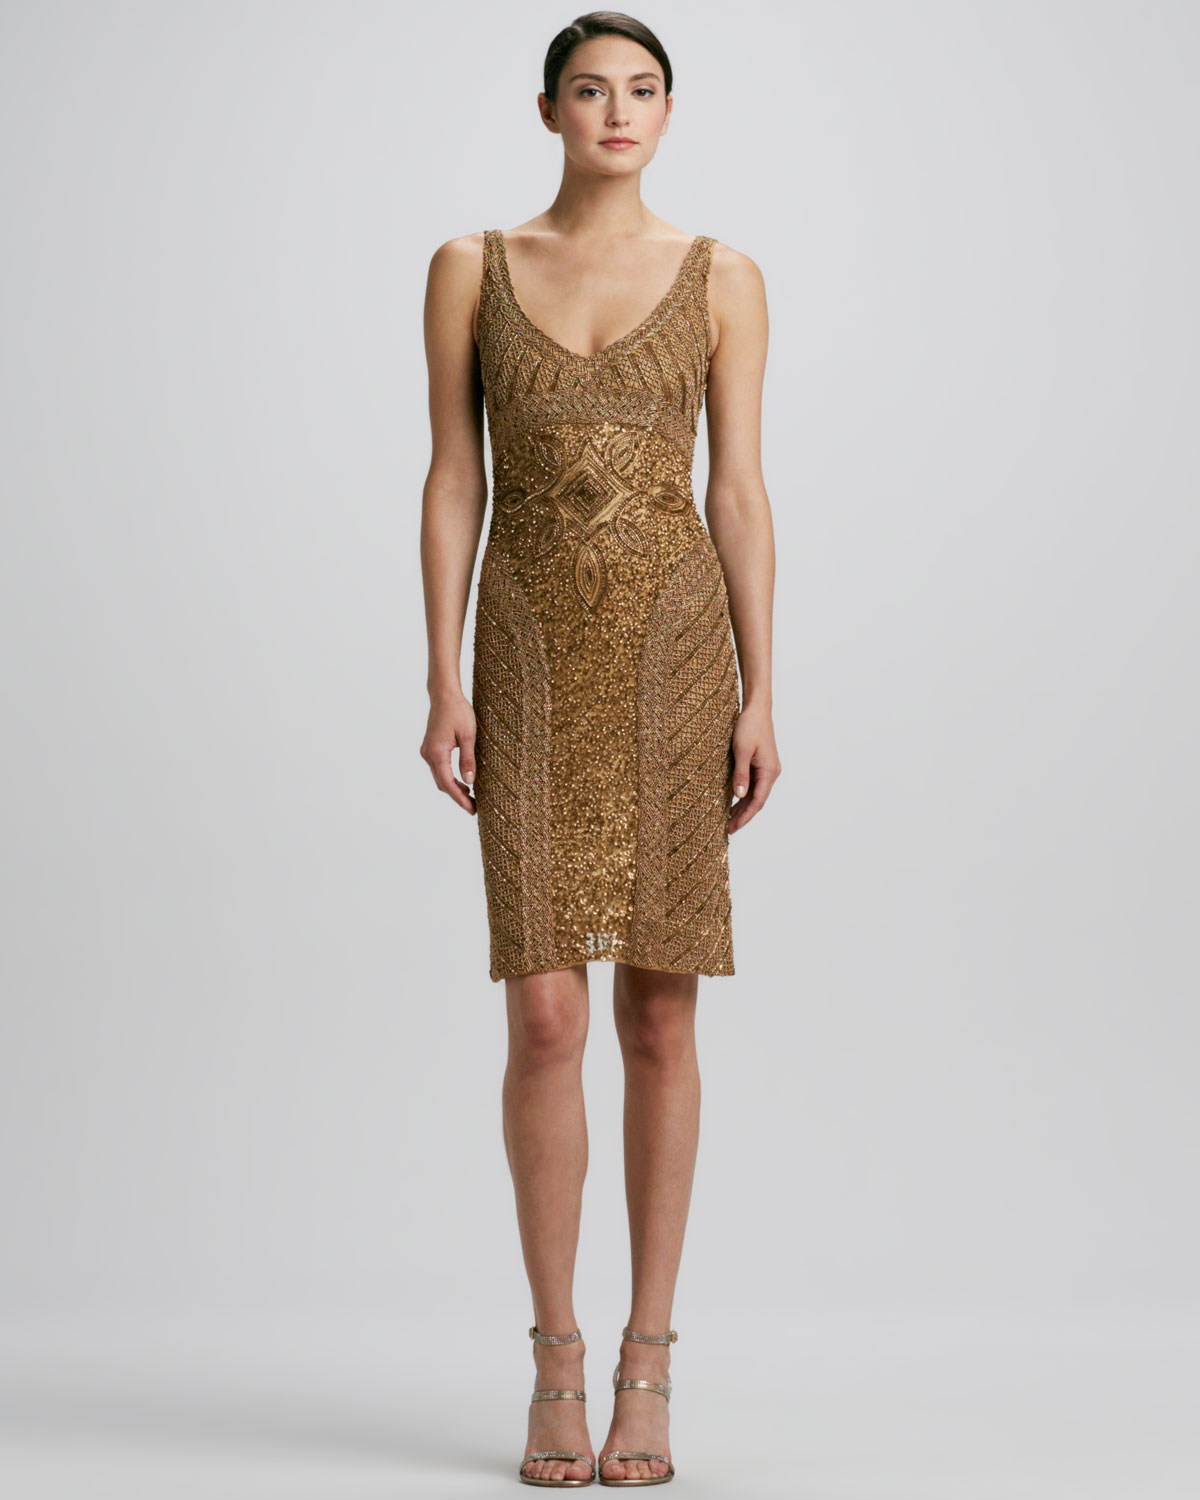 Lyst - Theia Beaded Sequined Cocktail Dress in Brown